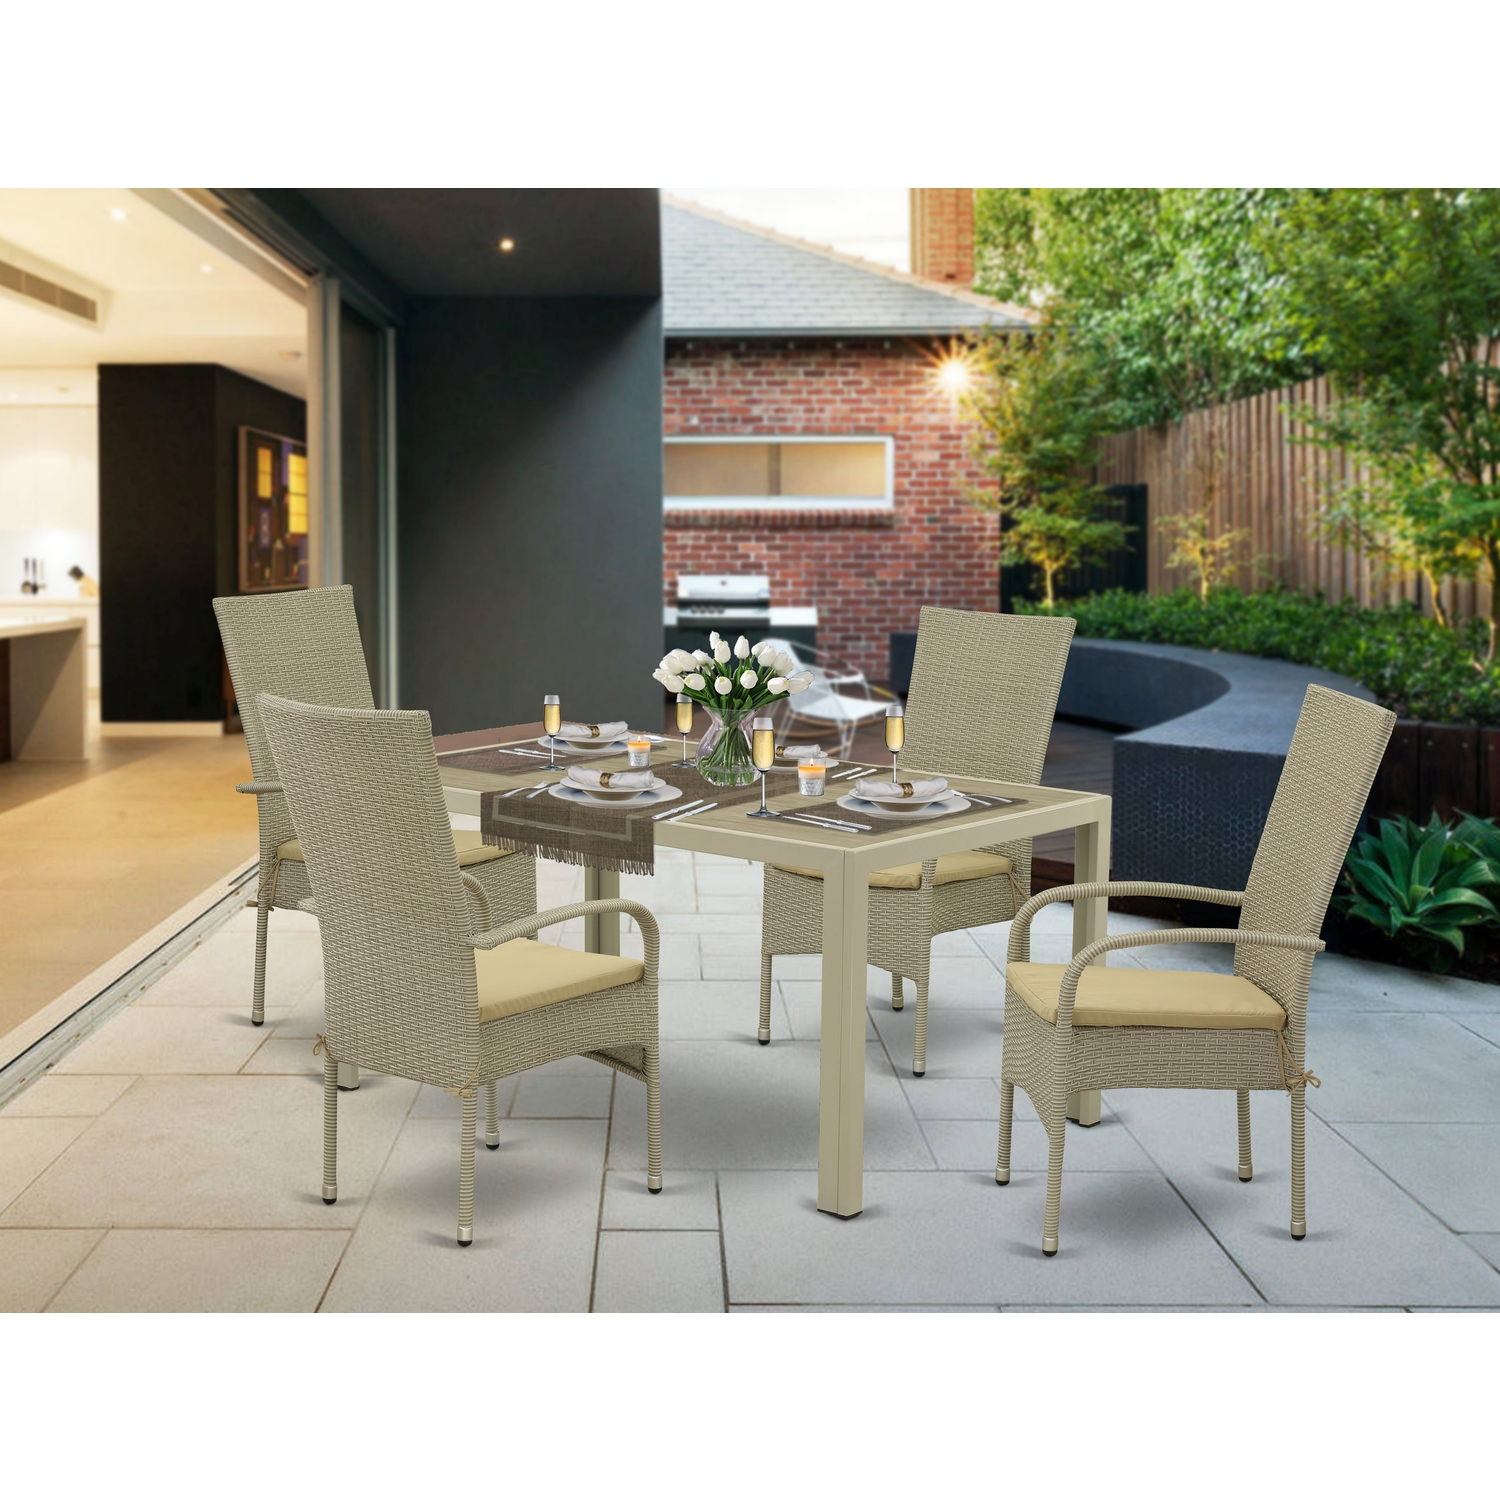 East West Furniture Jubi 5-piece Modern Metal Patio Dining Set in Natural - image 1 of 4